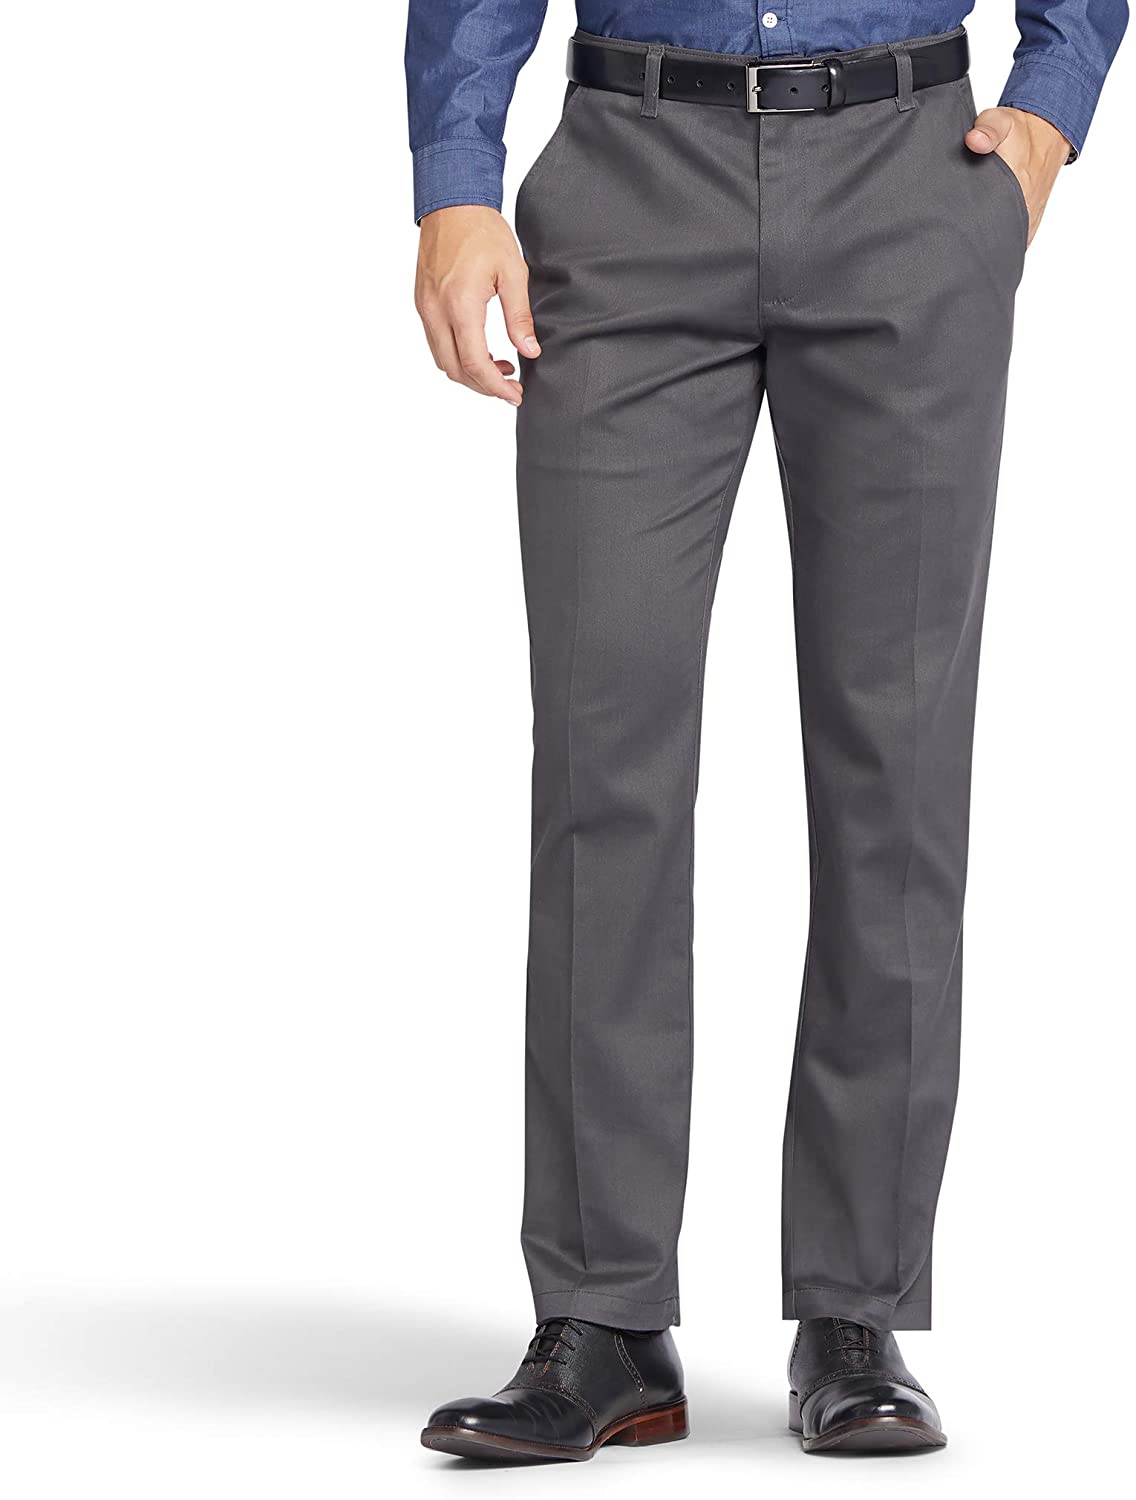 Lee Men's Total Freedom Flat Front Pant